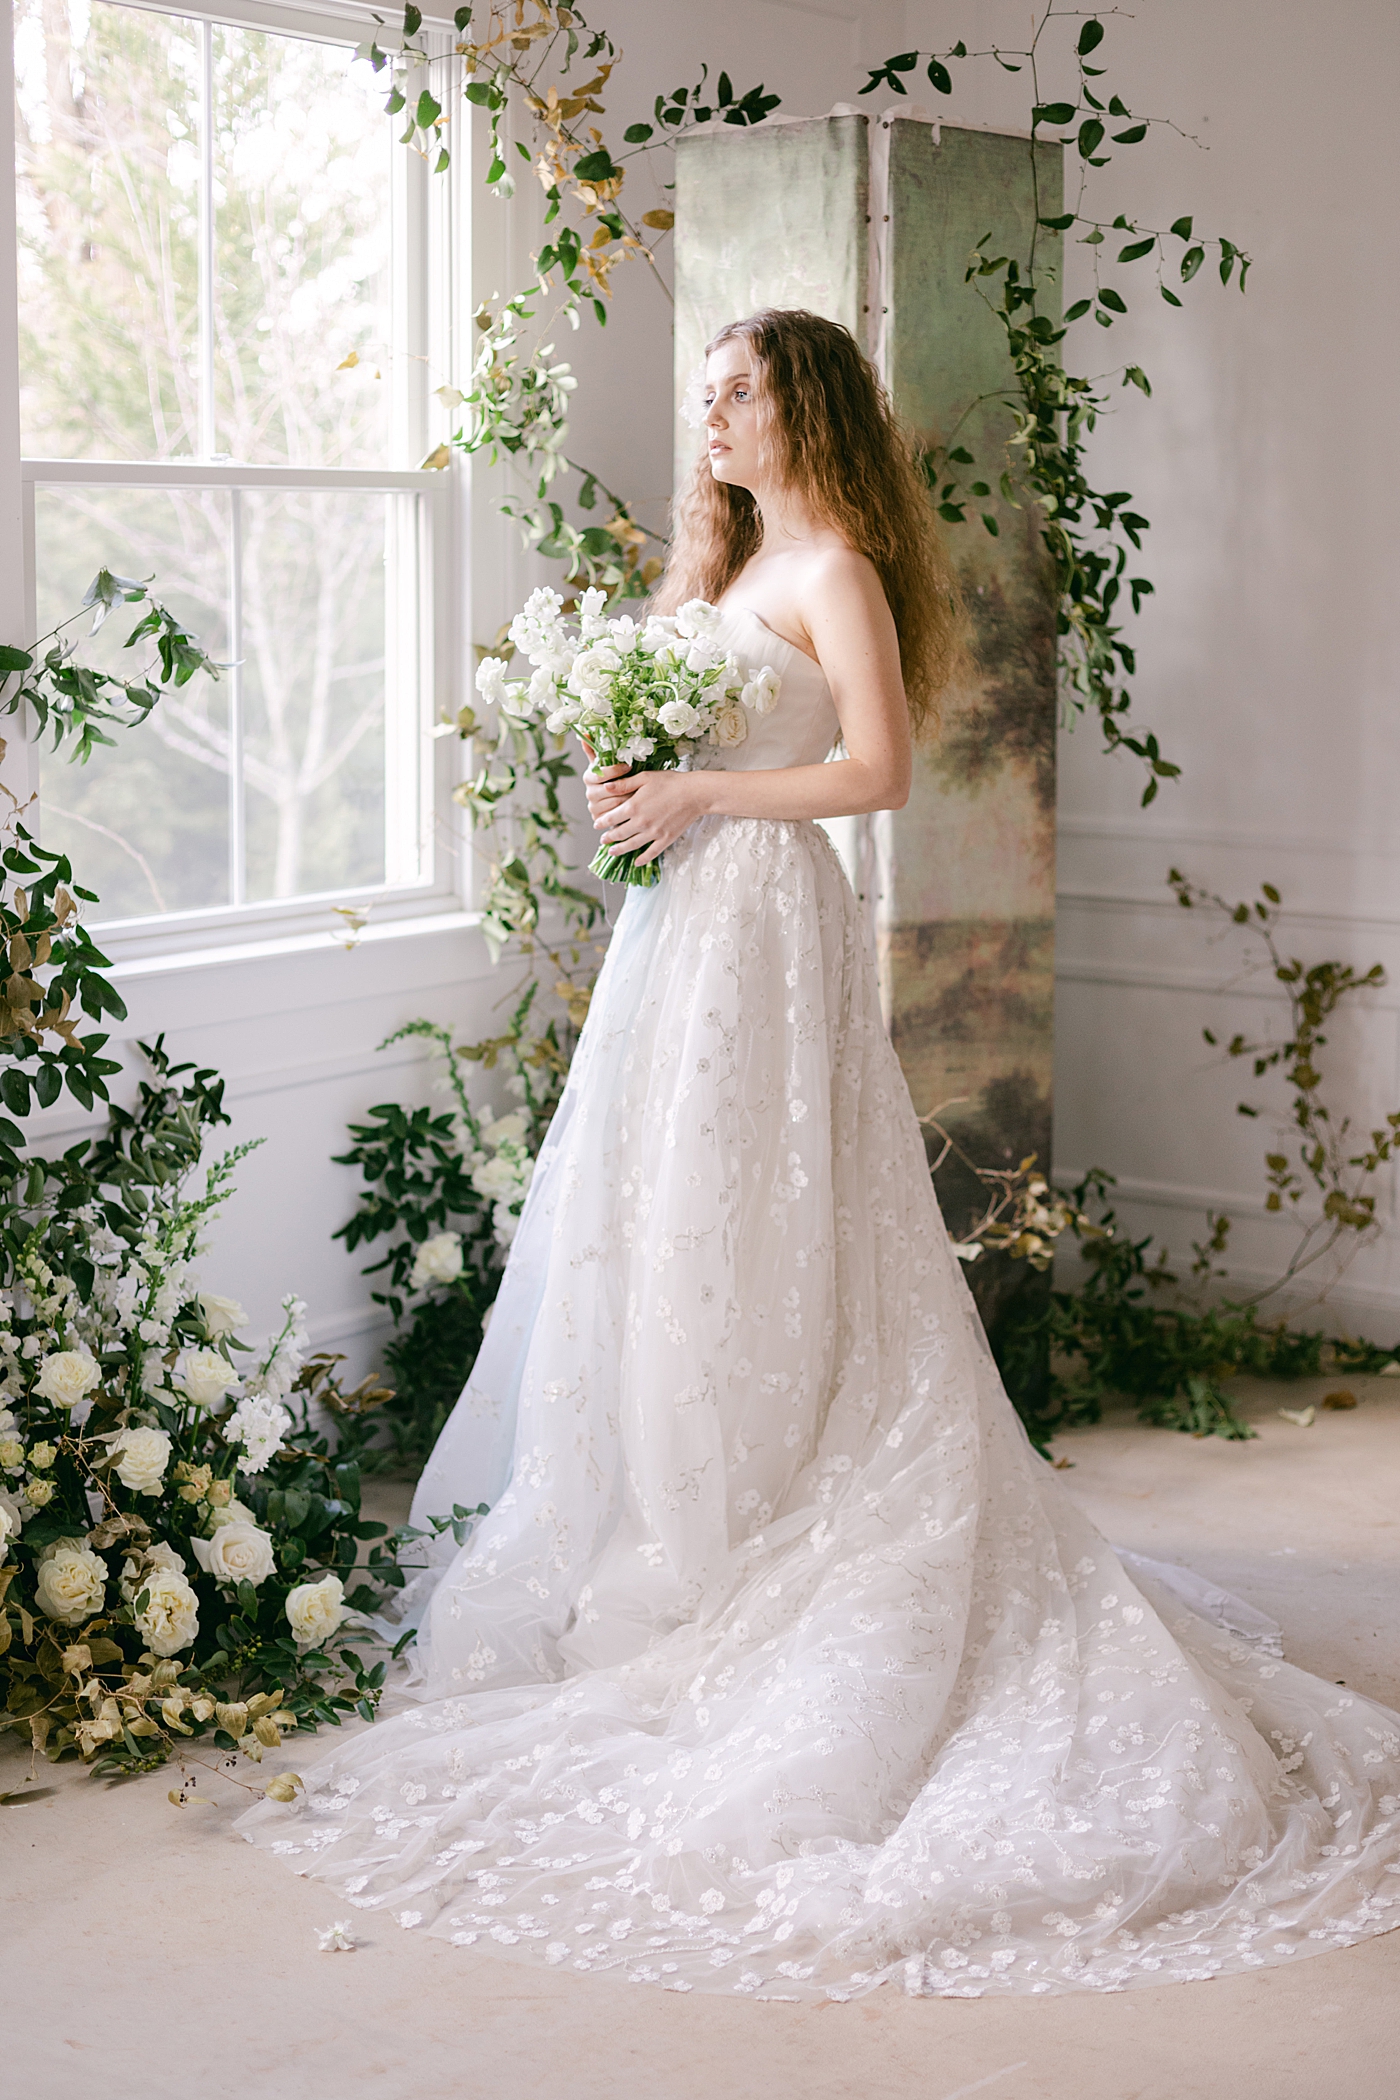 Bride holding a bouquet looking out a window during Old World Romance Editorial | Photo by Hope Helmuth Photograpghy